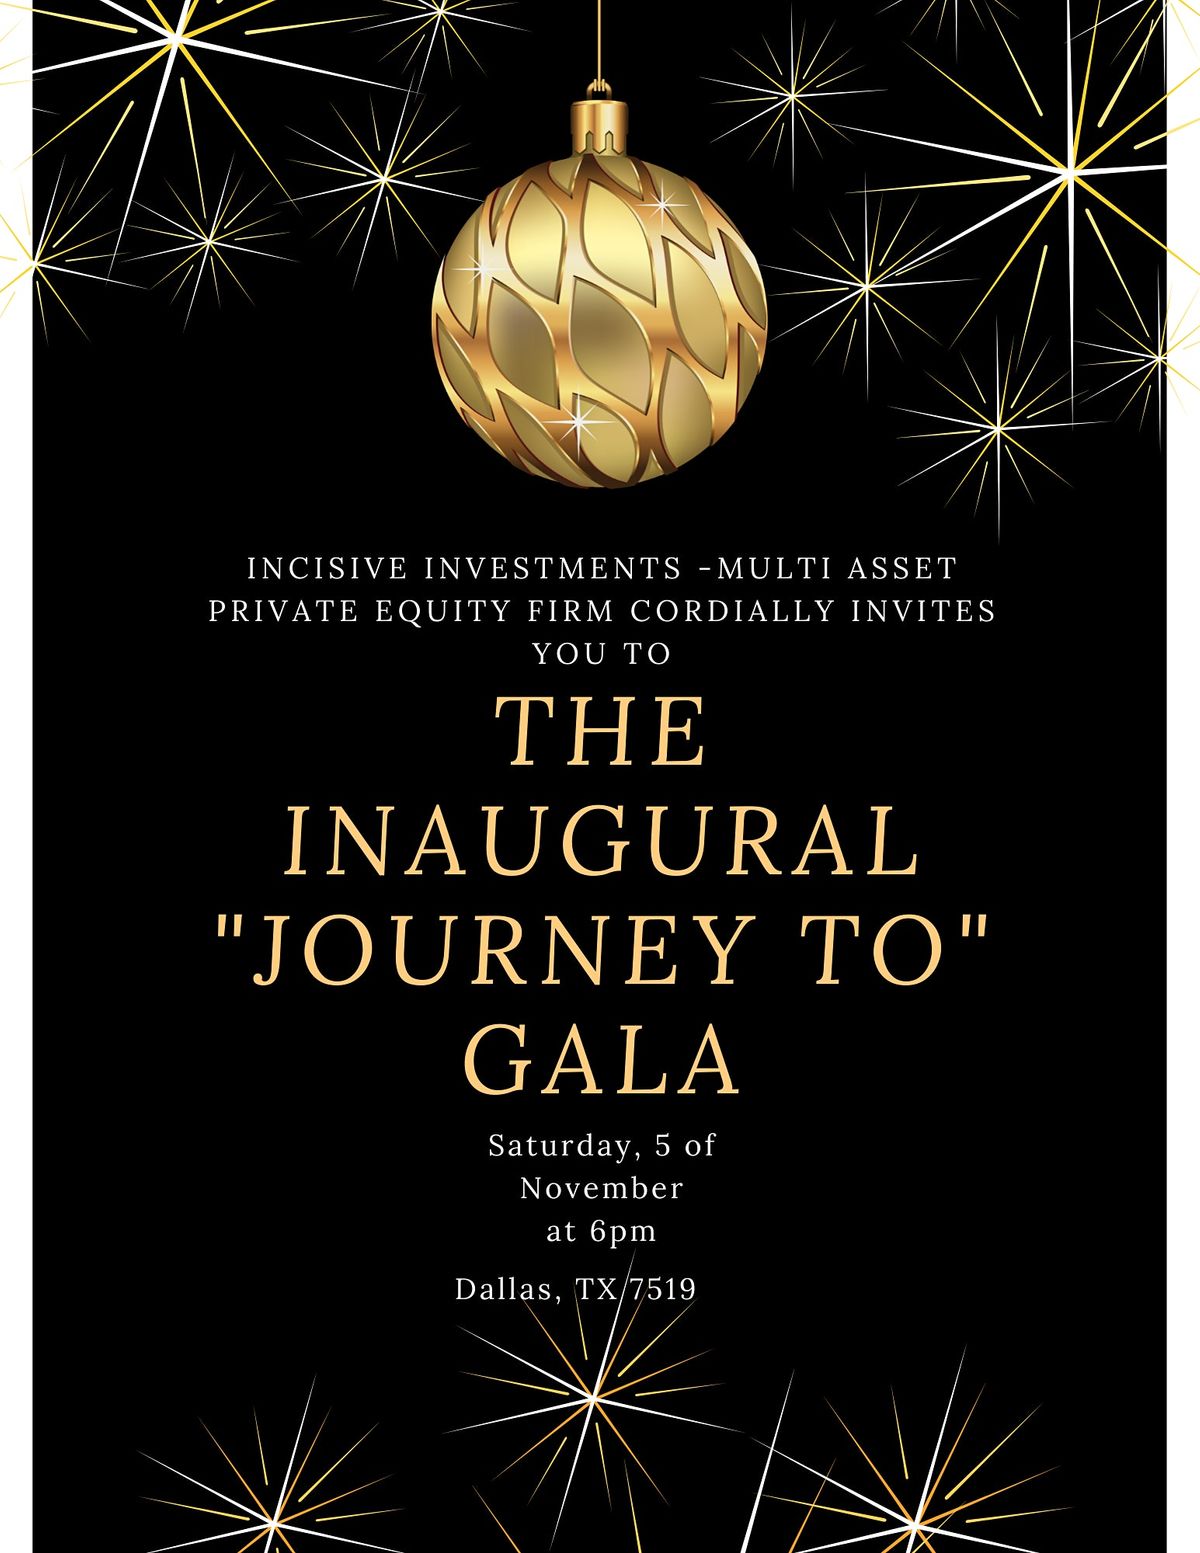 The Journey To Gala